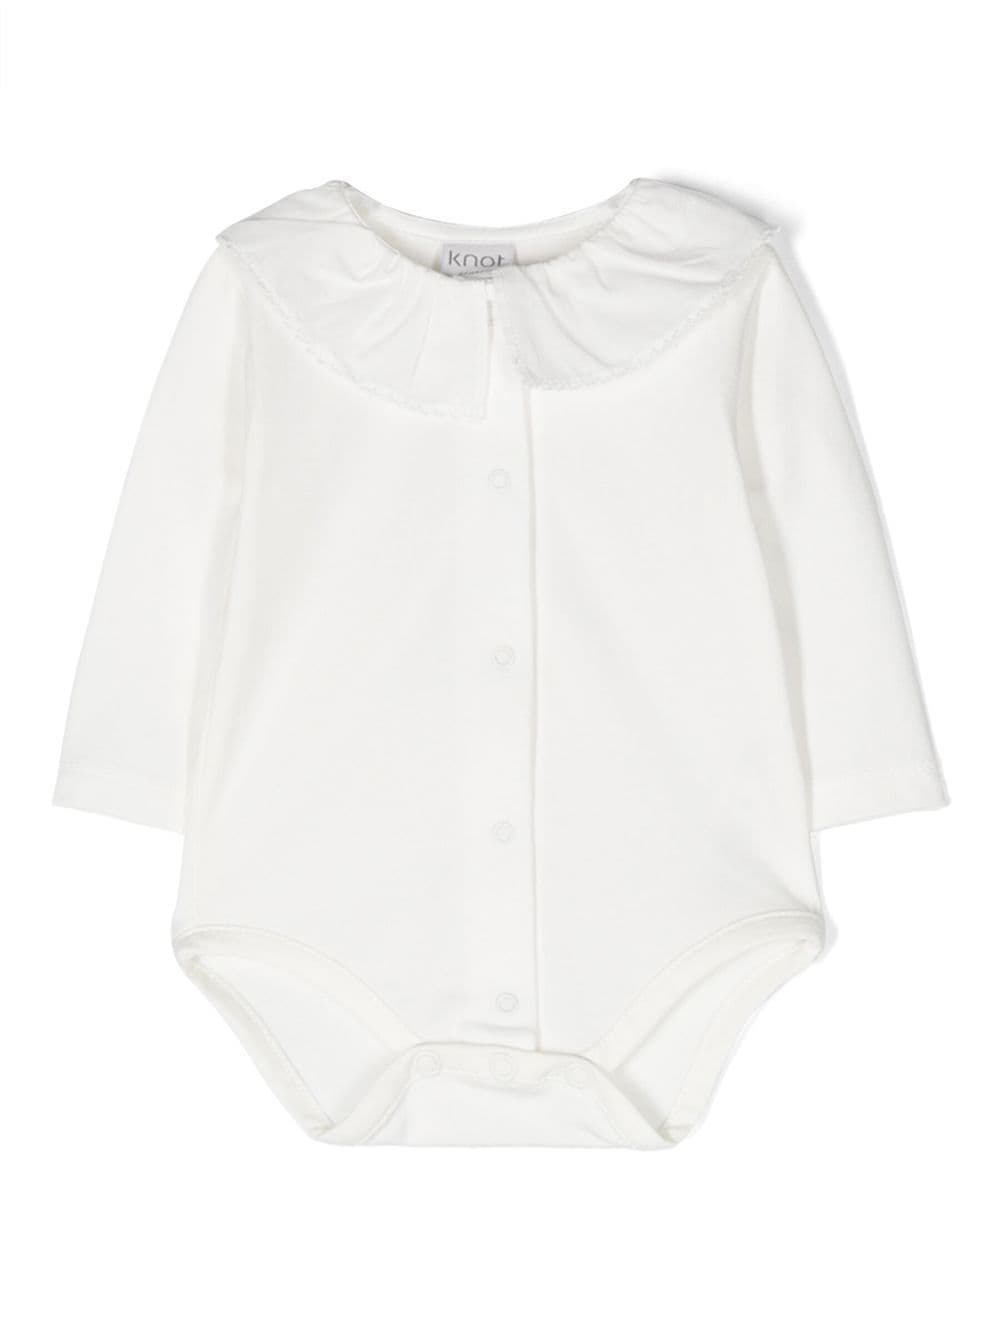 Knot Babies' Nora Cotton Body In White